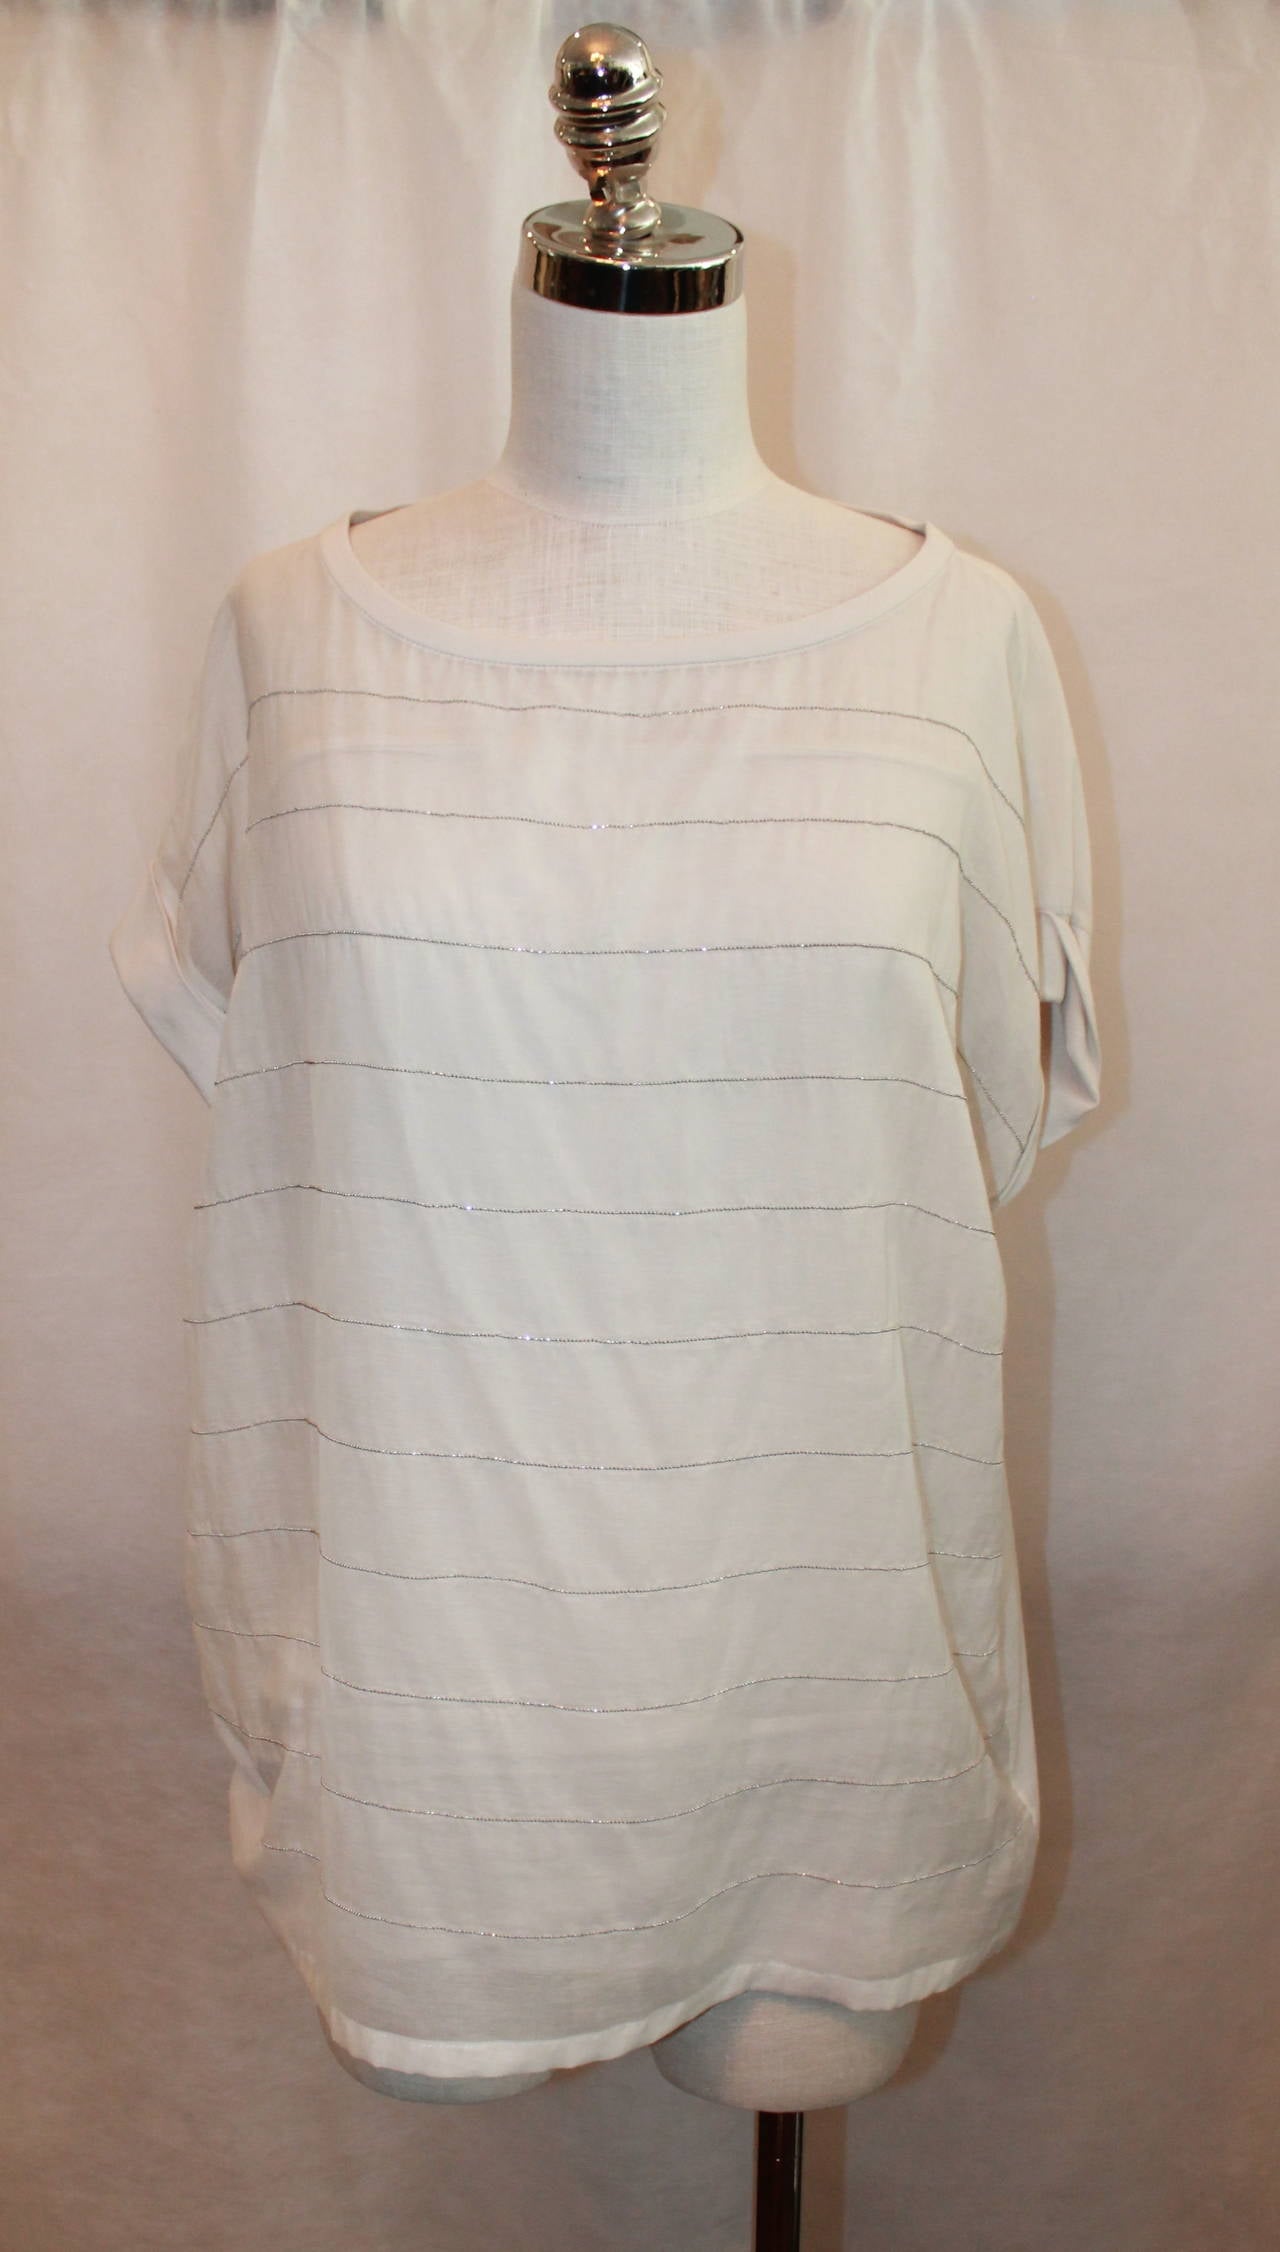 Brunello Cucinelli Ivory Loose Shirt with Tube Top - L. This shirt is in good condition with light use. The shirt has faint, small studded stripes. 

Measurements:

Tube Top
Bust- up to 34